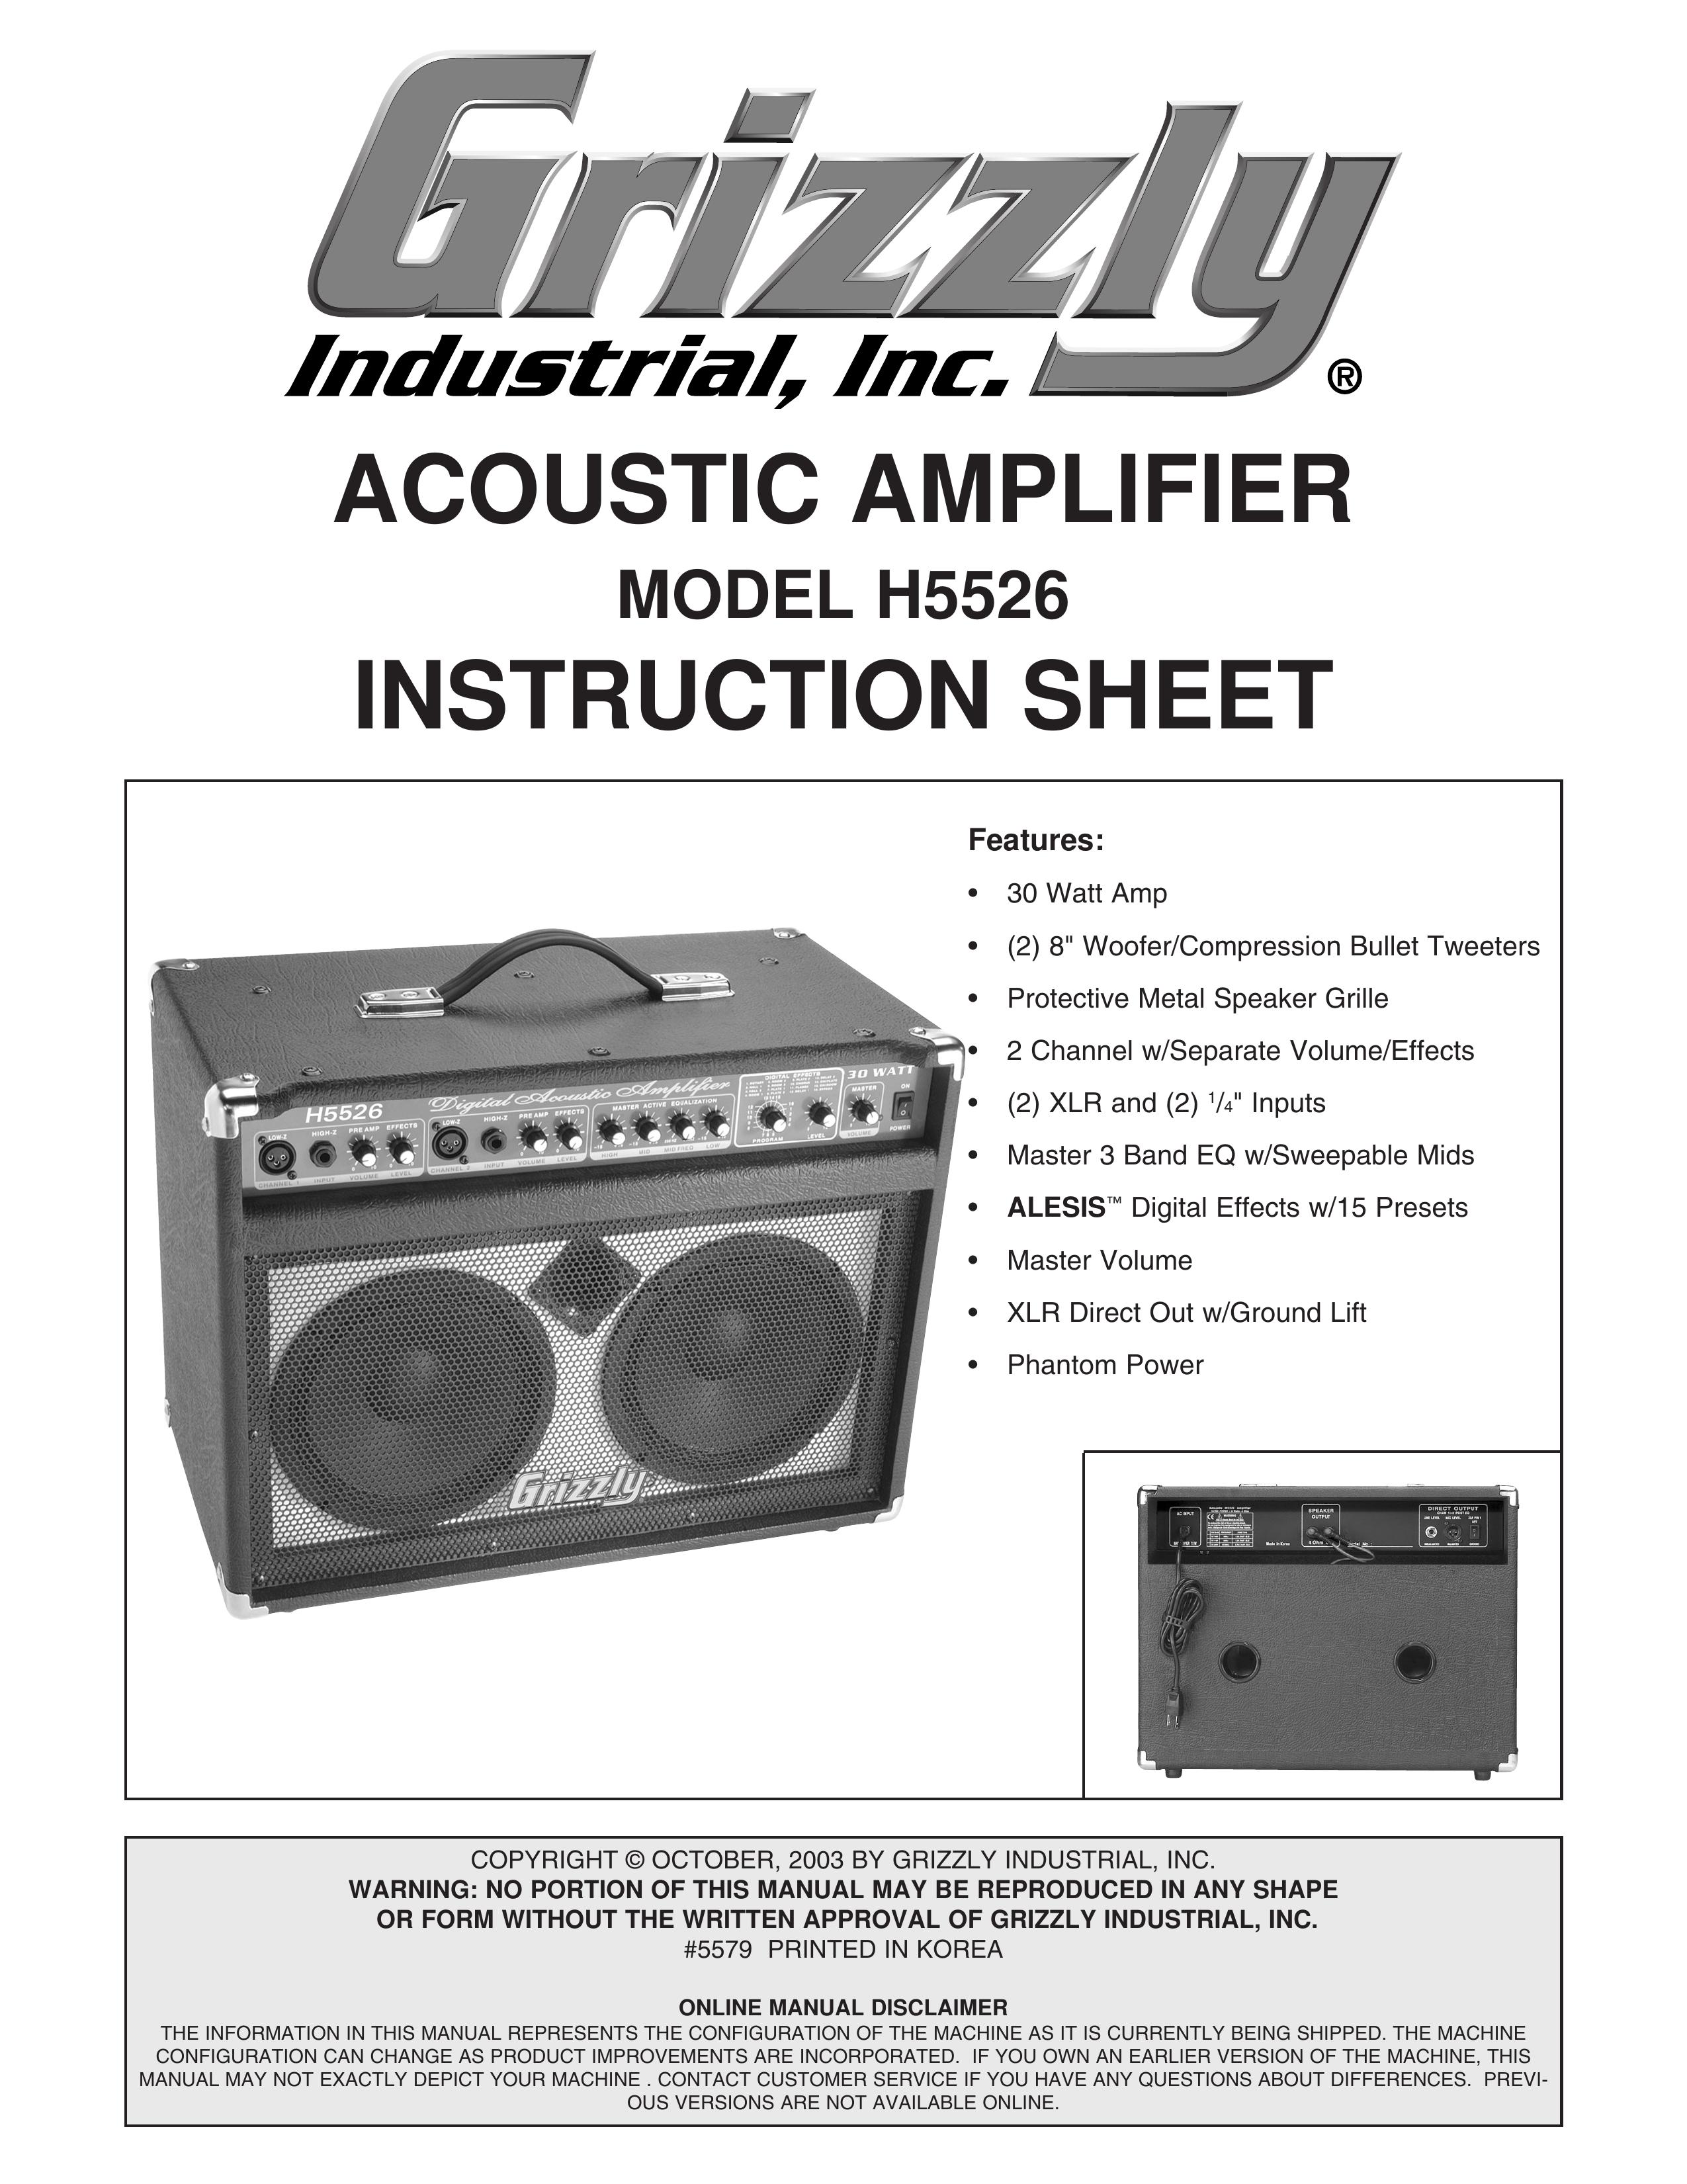 Grizzly h5526 Musical Instrument Amplifier User Manual